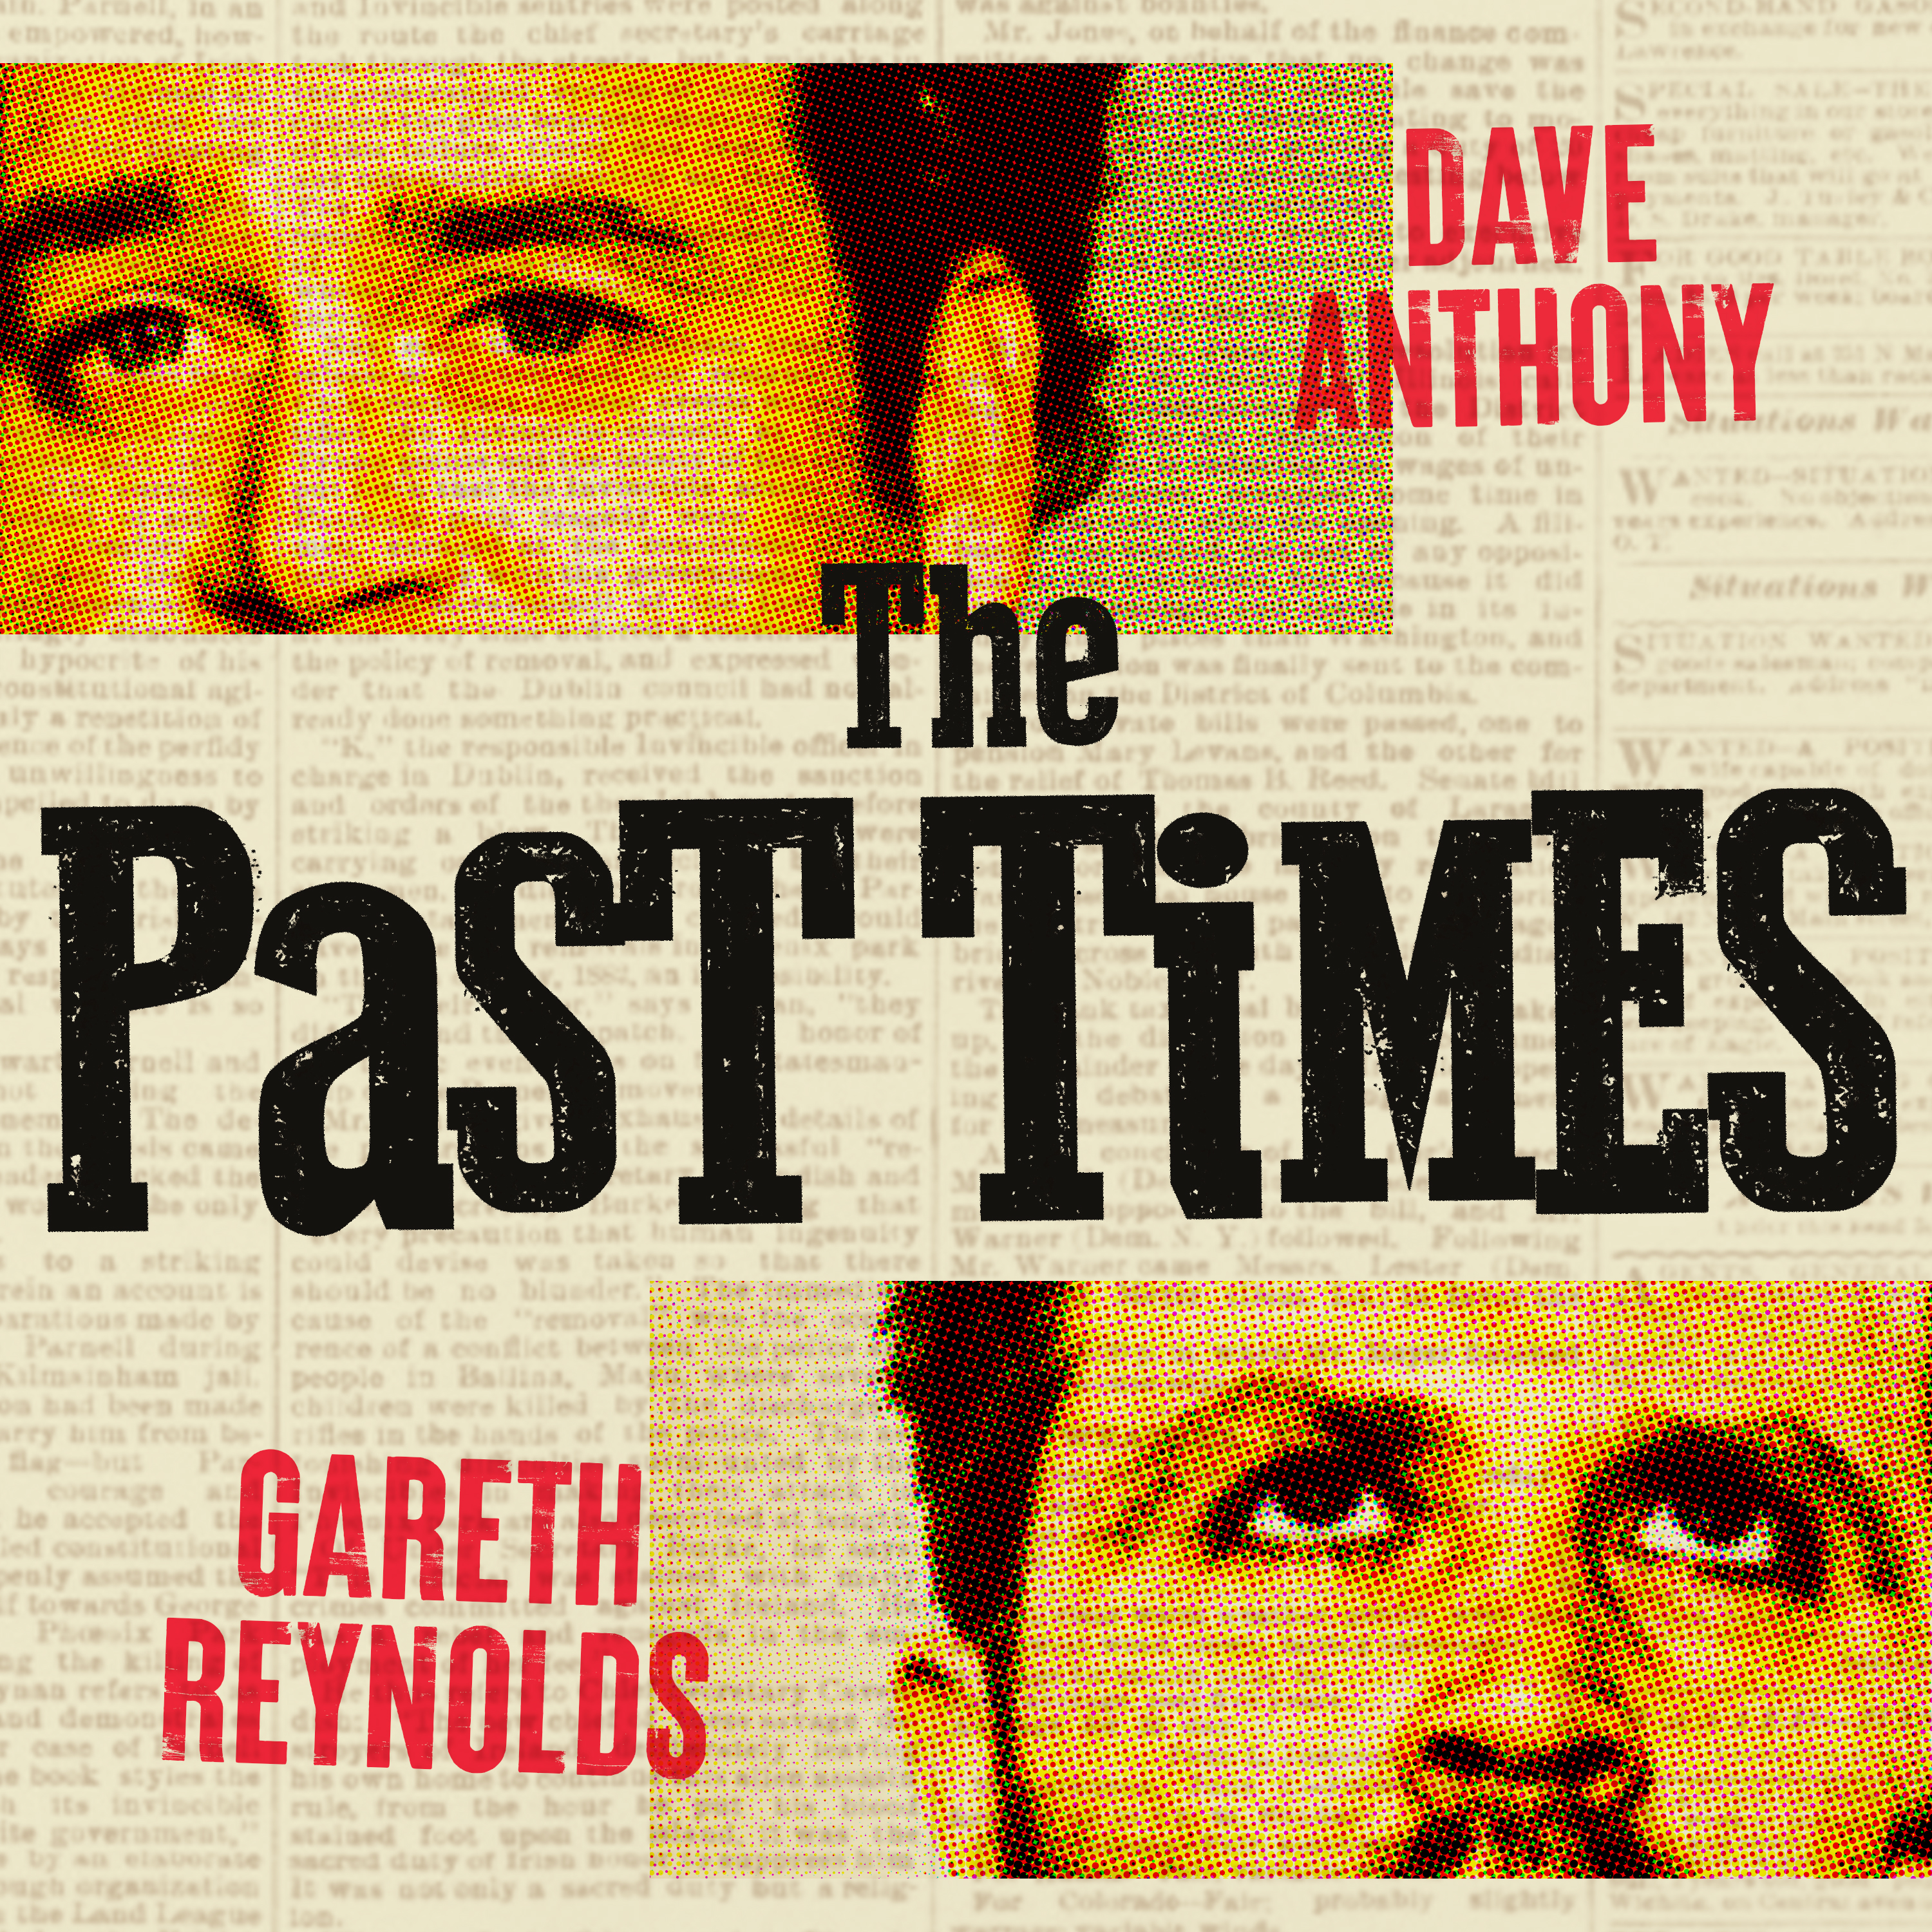 2 - Wil Anderson: The Past Times